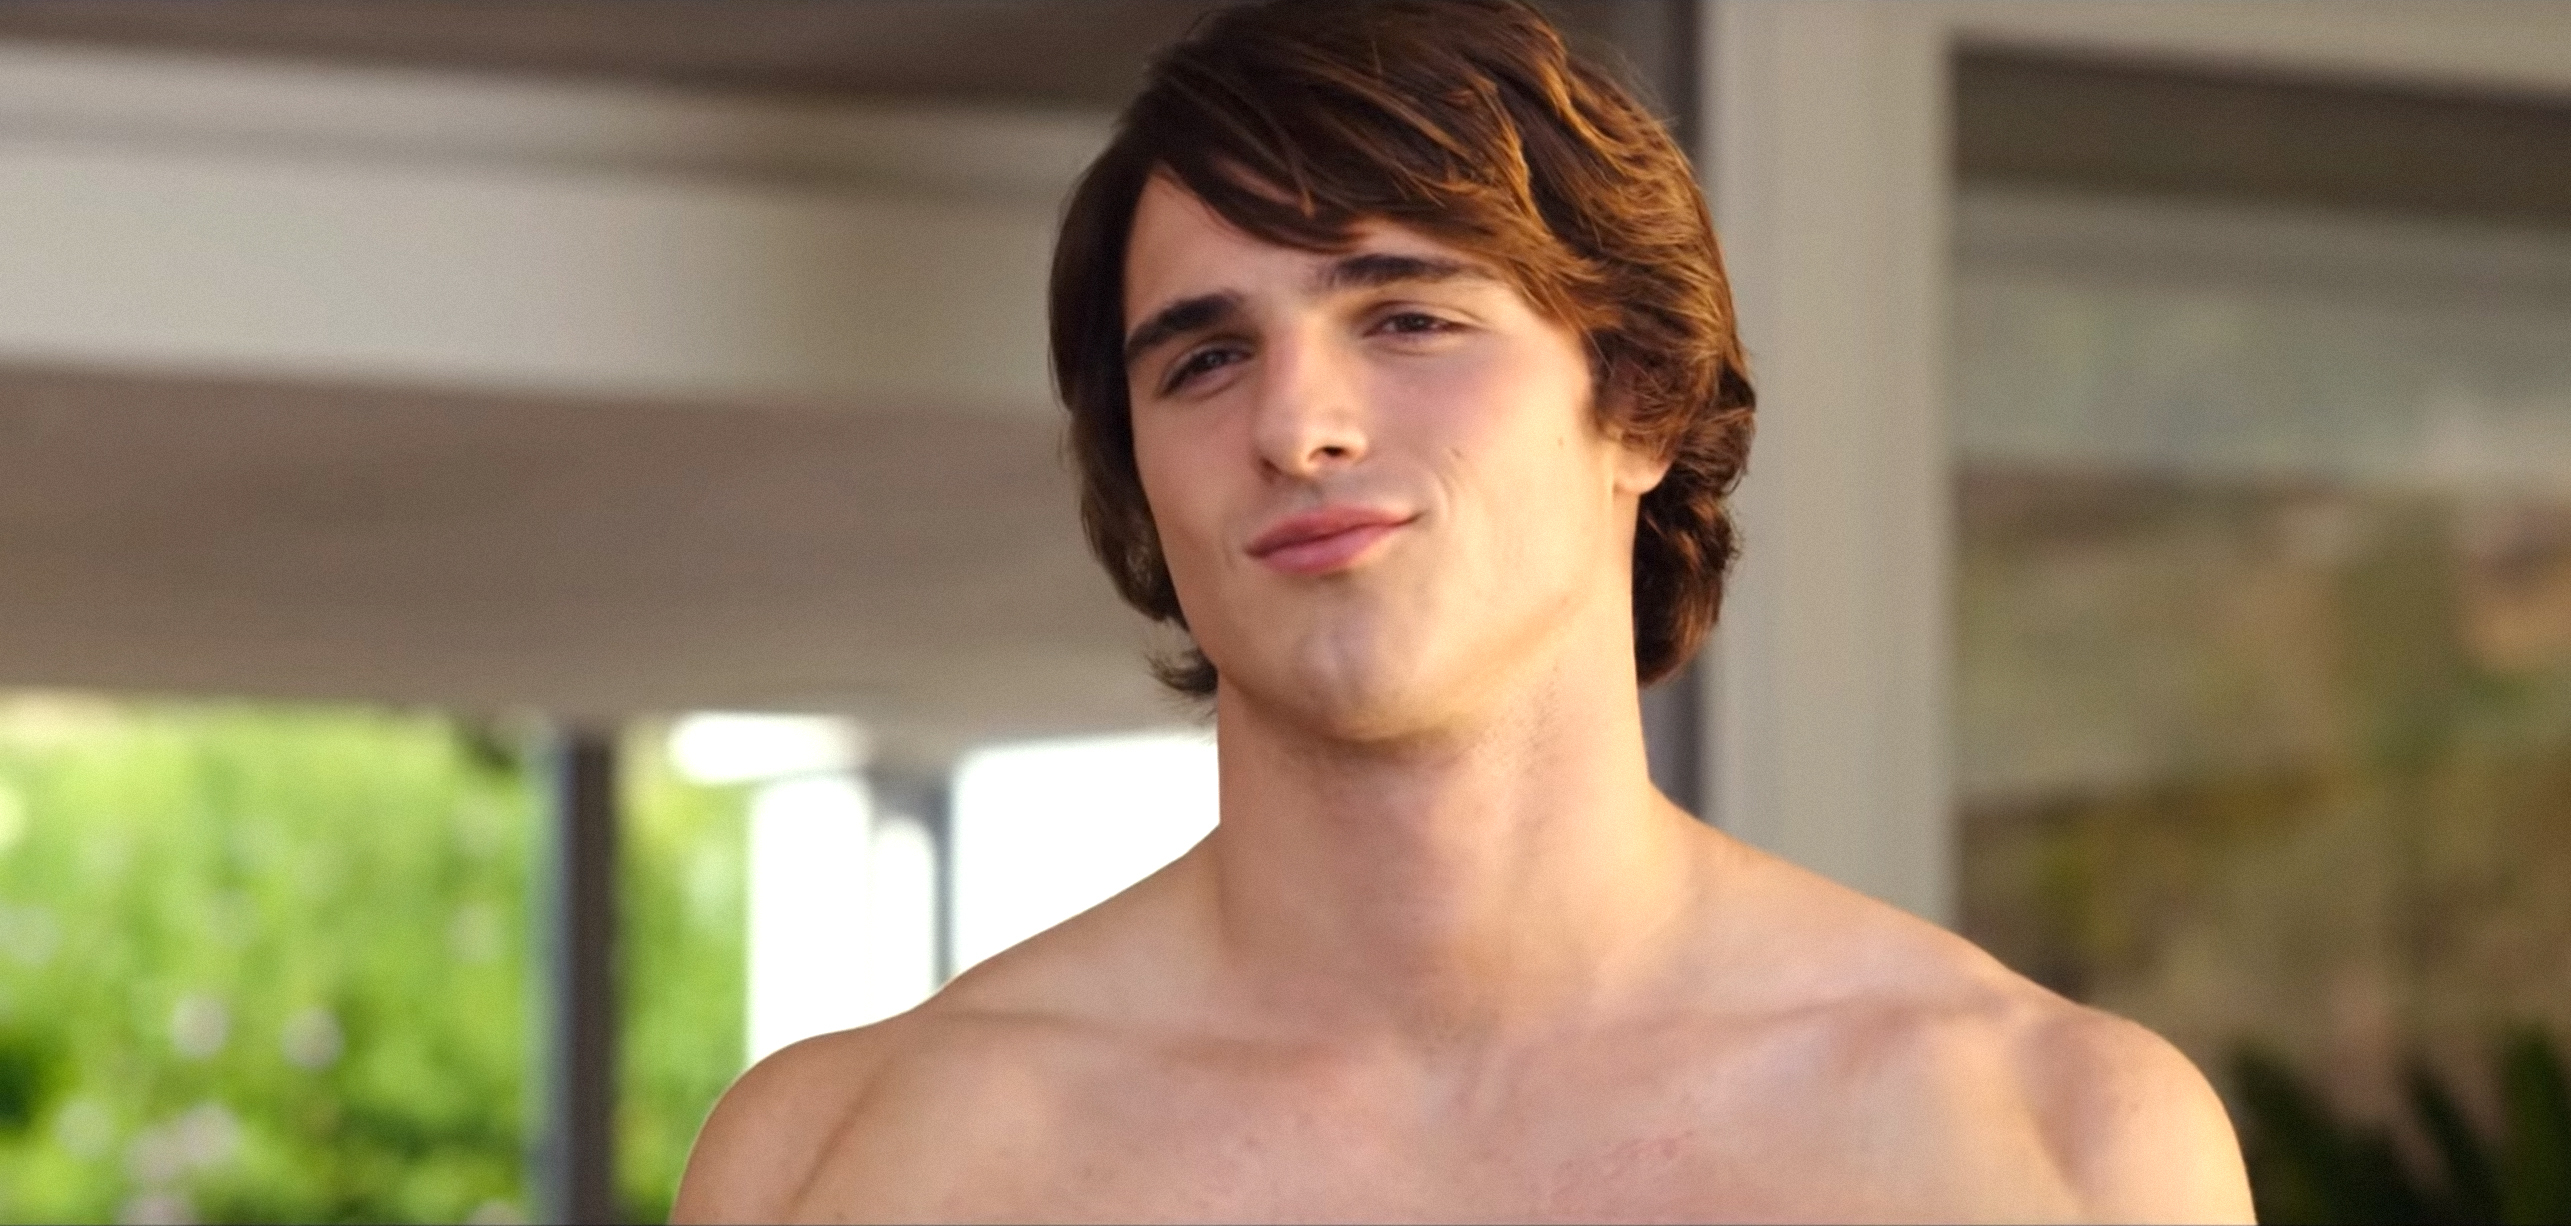 Shirtless Noah in a scene from &quot;The Kissing Booth&quot;